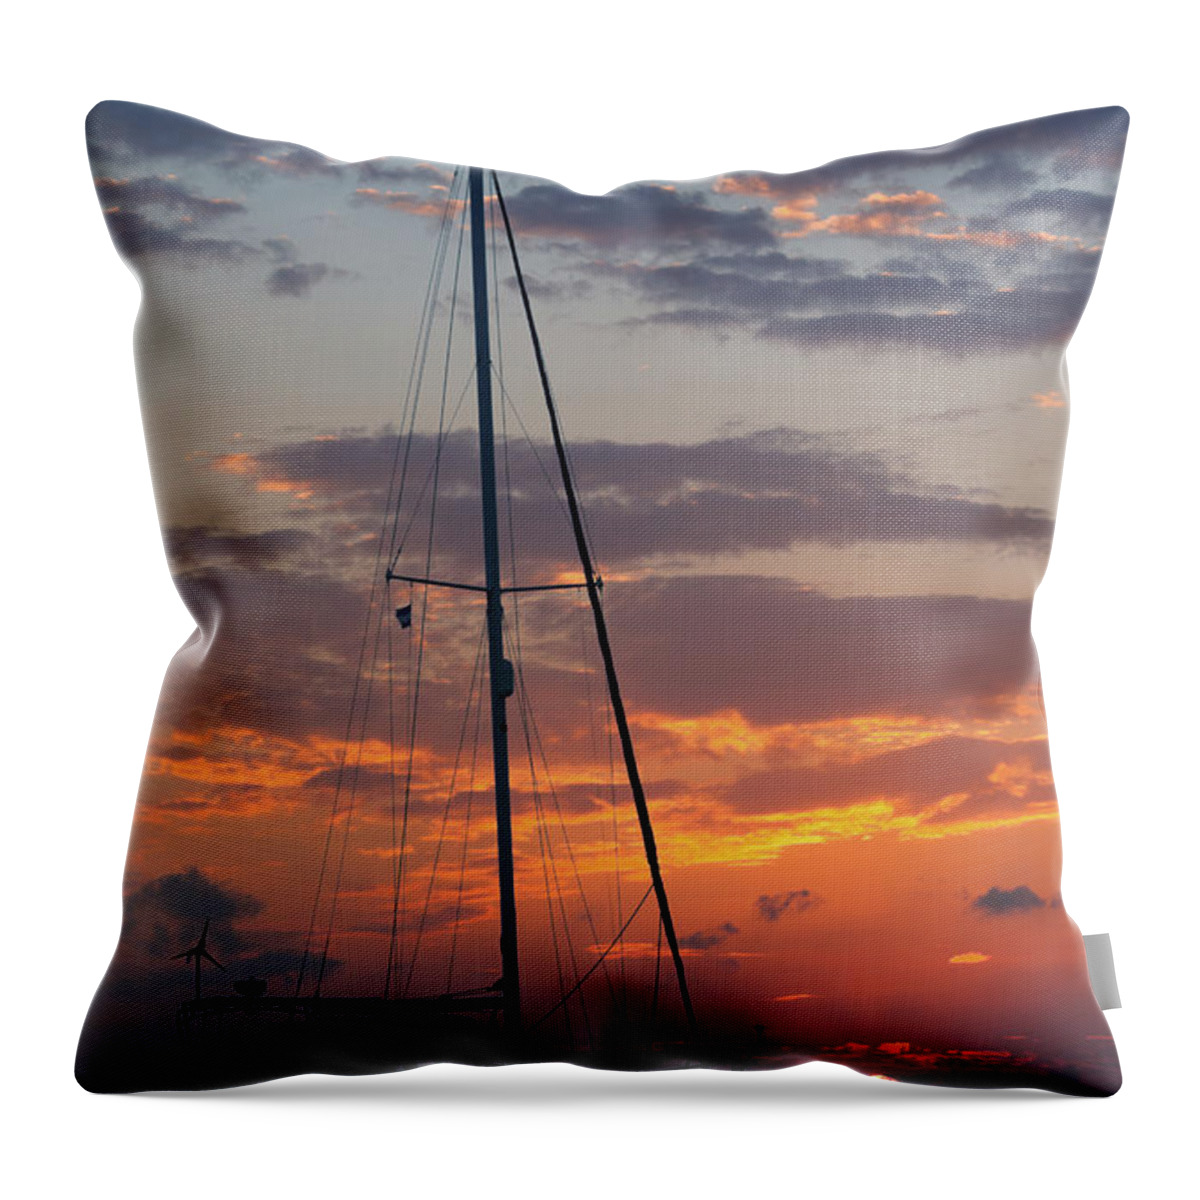 Sailboat Throw Pillow featuring the photograph Sailboat At Sunset by Thepalmer